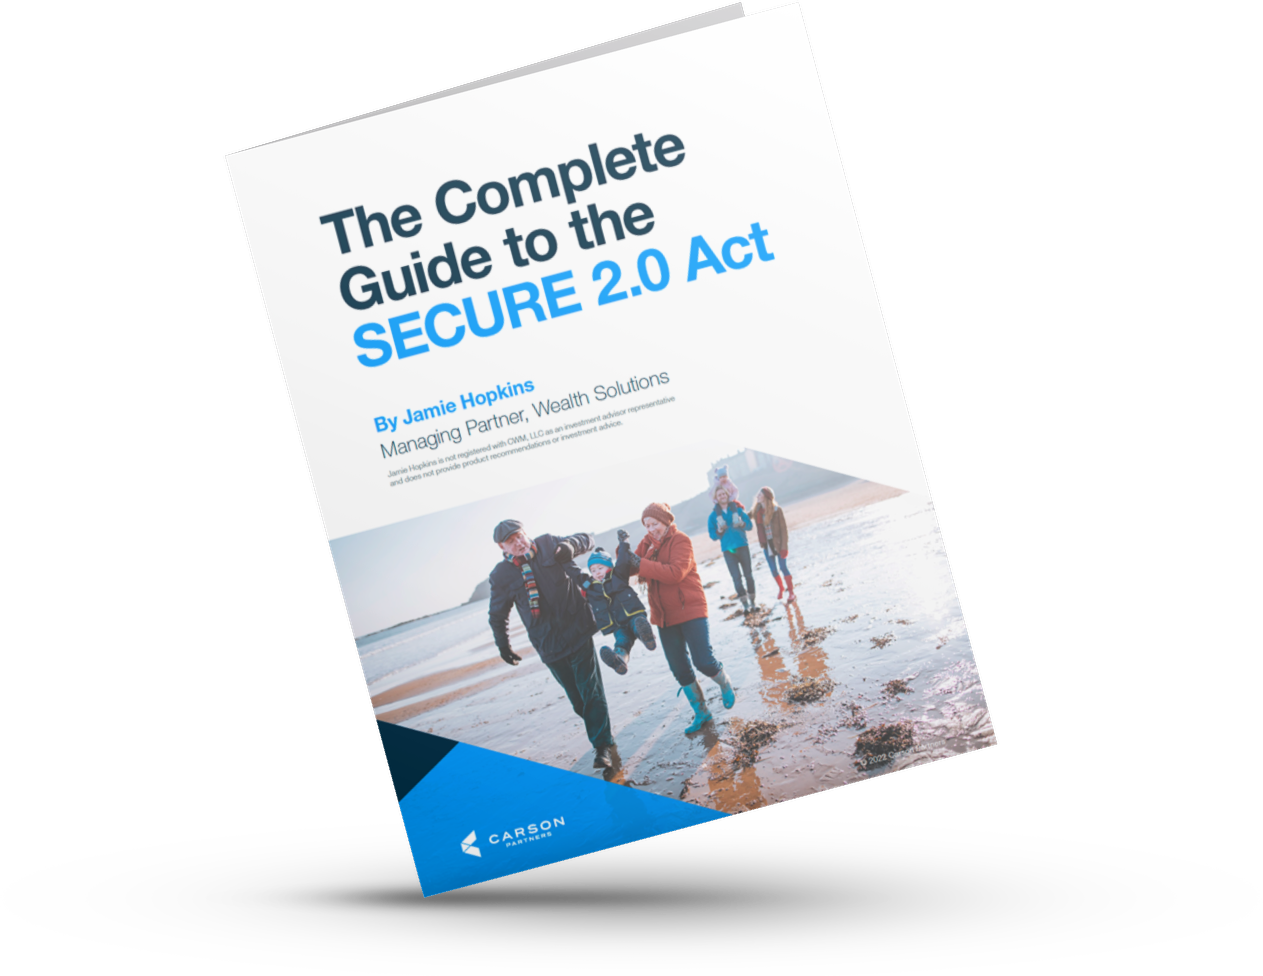 The Complete Guide to the Secure 2.0 Act